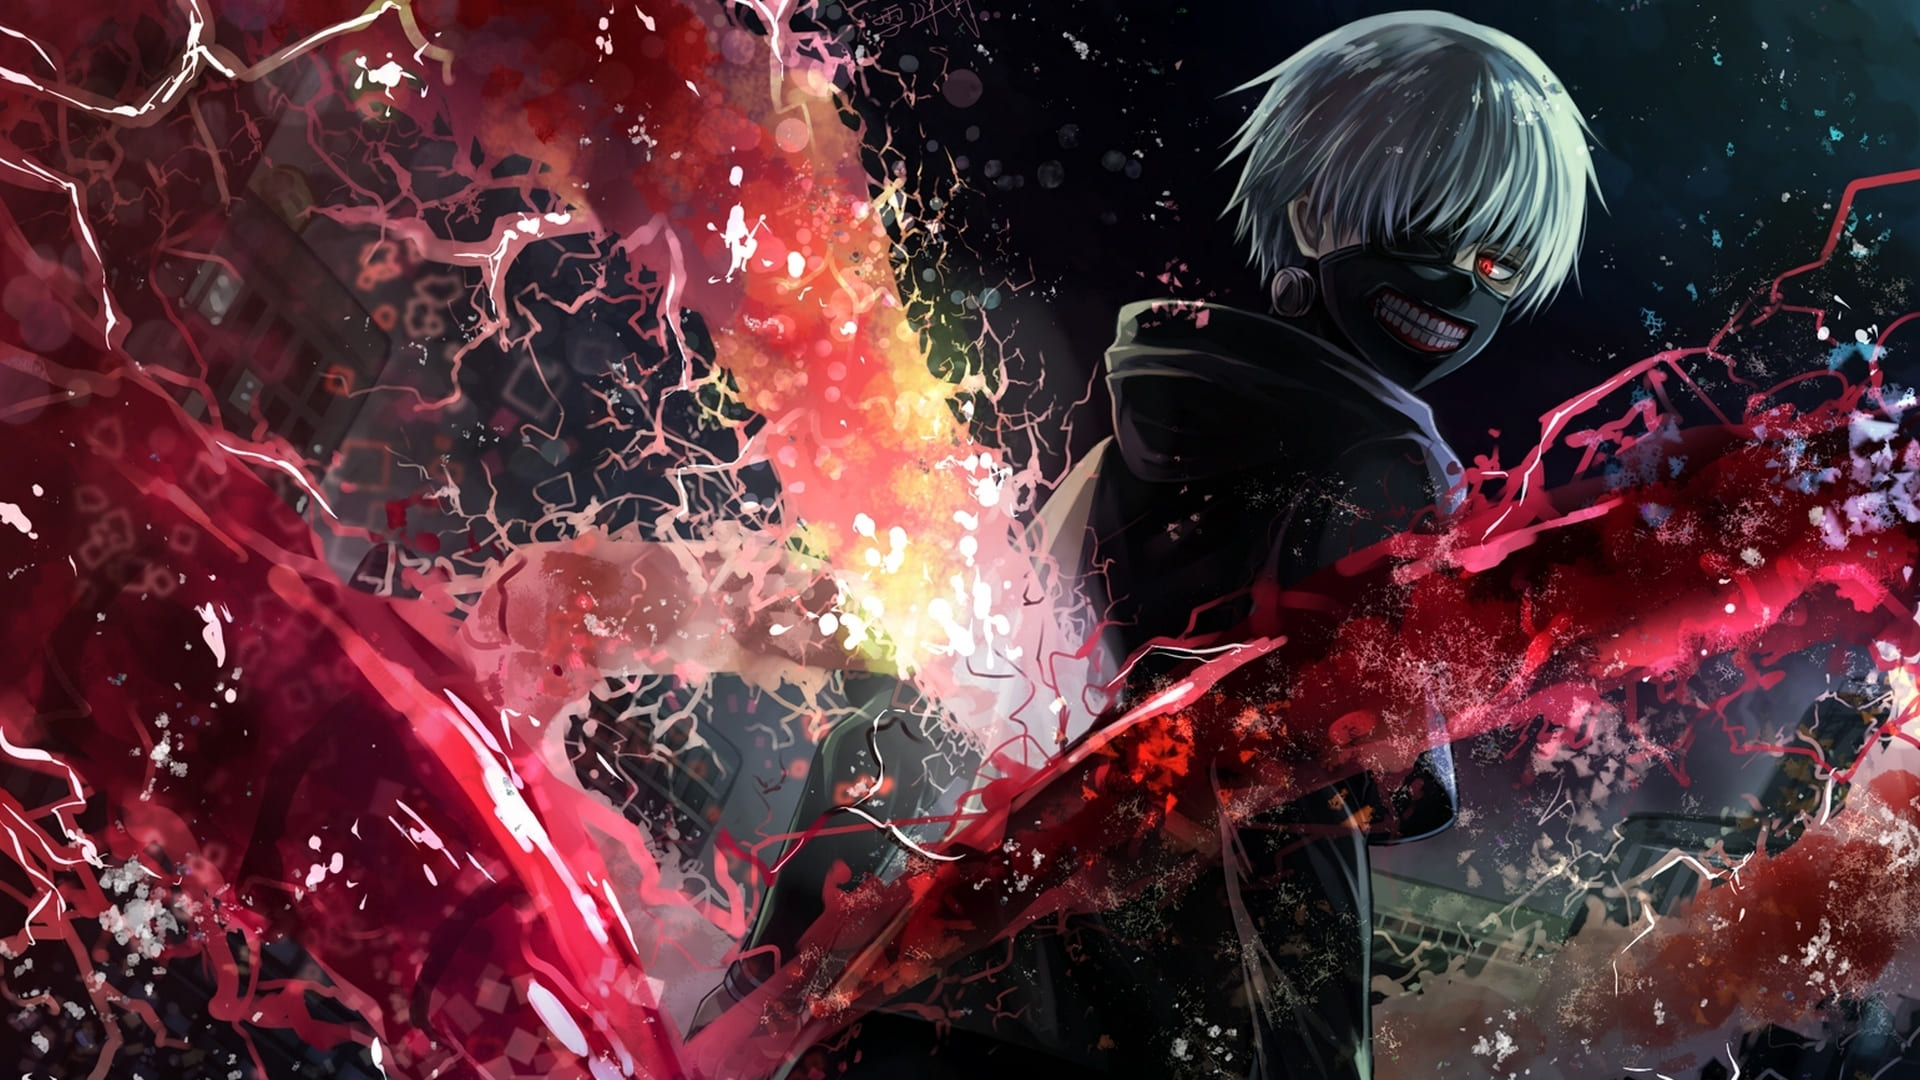 Anime Wallpaper Best Free Anime Photo & Image Download